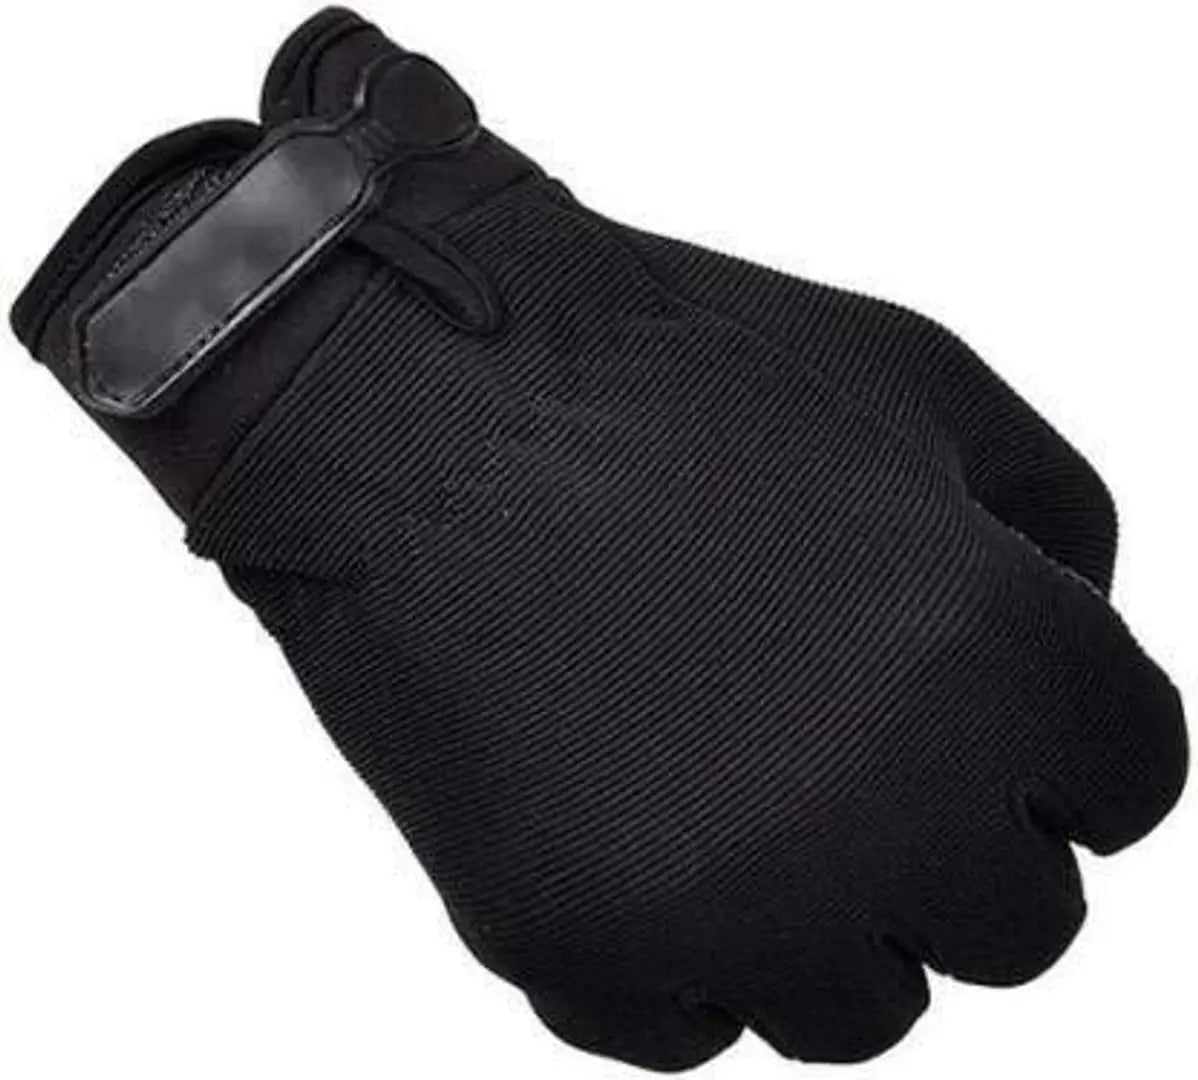 ZaySoo Anti Slip Riding Gloves Touch Screen Friendly Gloves Riding Gloves (Black)